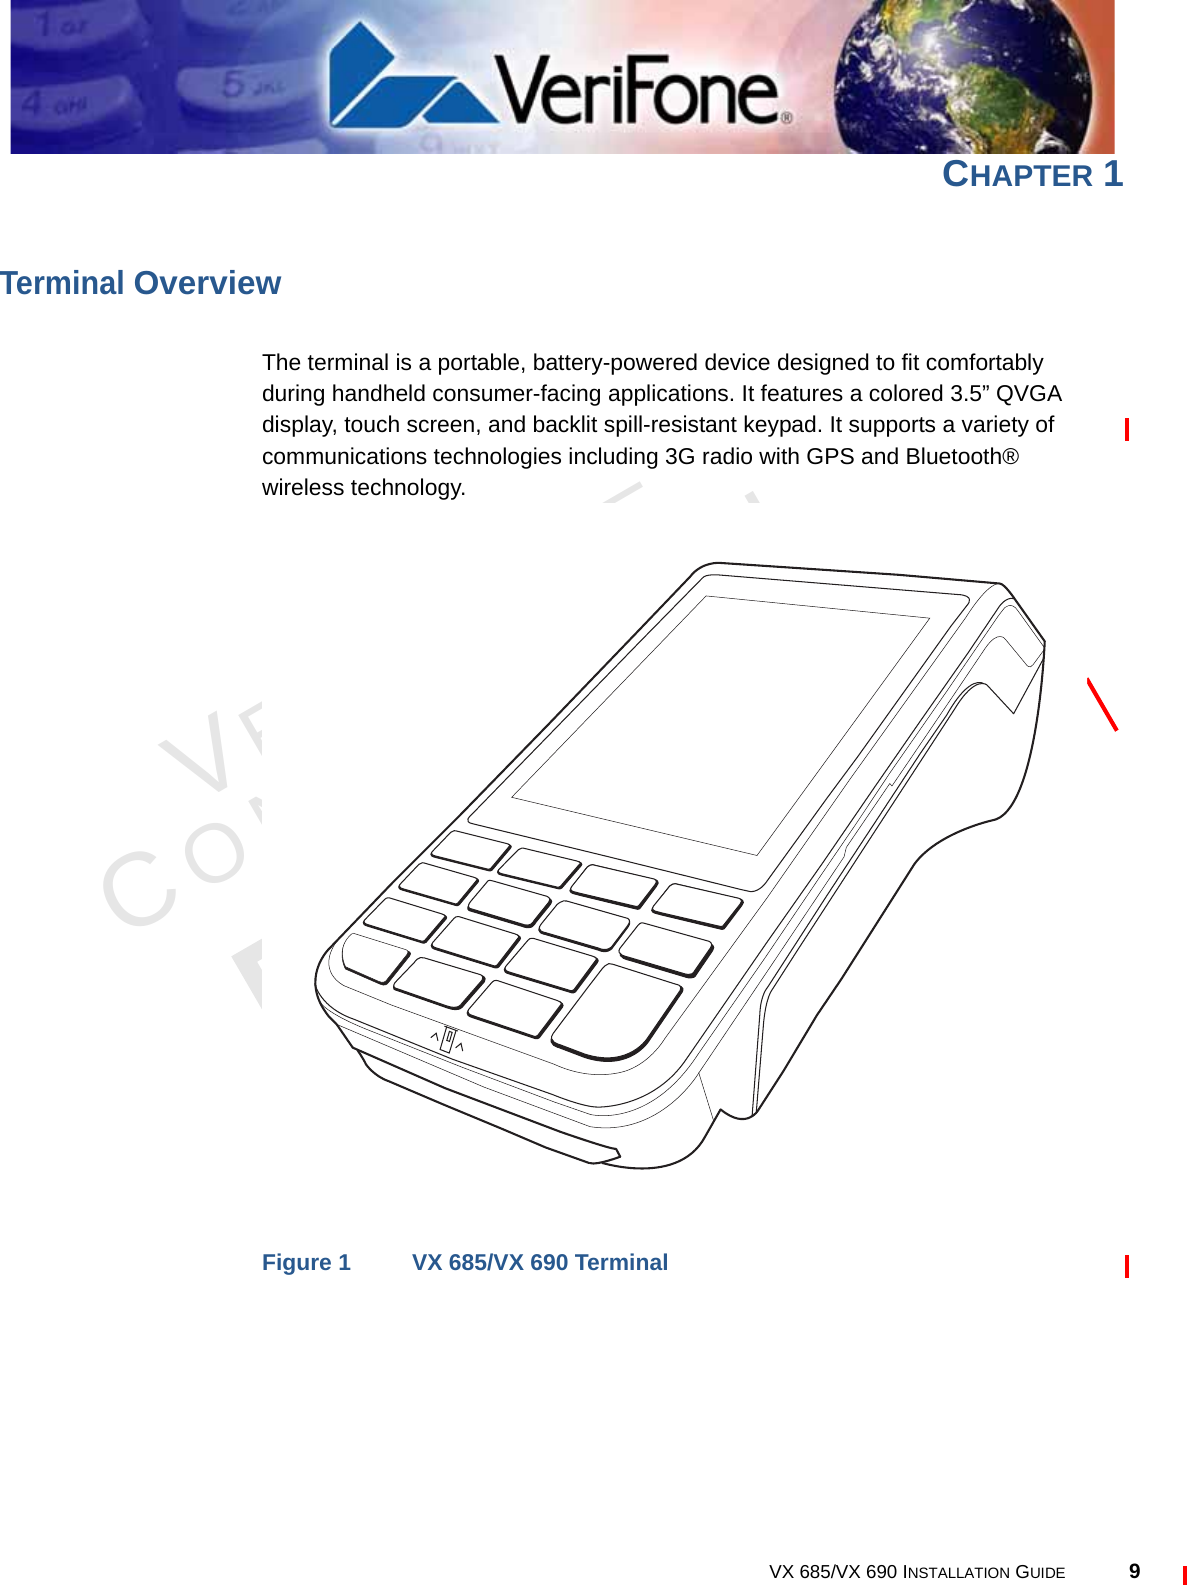 VERIFONECONFIDENTIALREVISION A.3 VX 685/VX 690 INSTALLATION GUIDE 9CHAPTER 1Terminal OverviewThe terminal is a portable, battery-powered device designed to fit comfortably during handheld consumer-facing applications. It features a colored 3.5” QVGA display, touch screen, and backlit spill-resistant keypad. It supports a variety of communications technologies including 3G radio with GPS and Bluetooth® wireless technology.Figure 1 VX 685/VX 690 Terminal